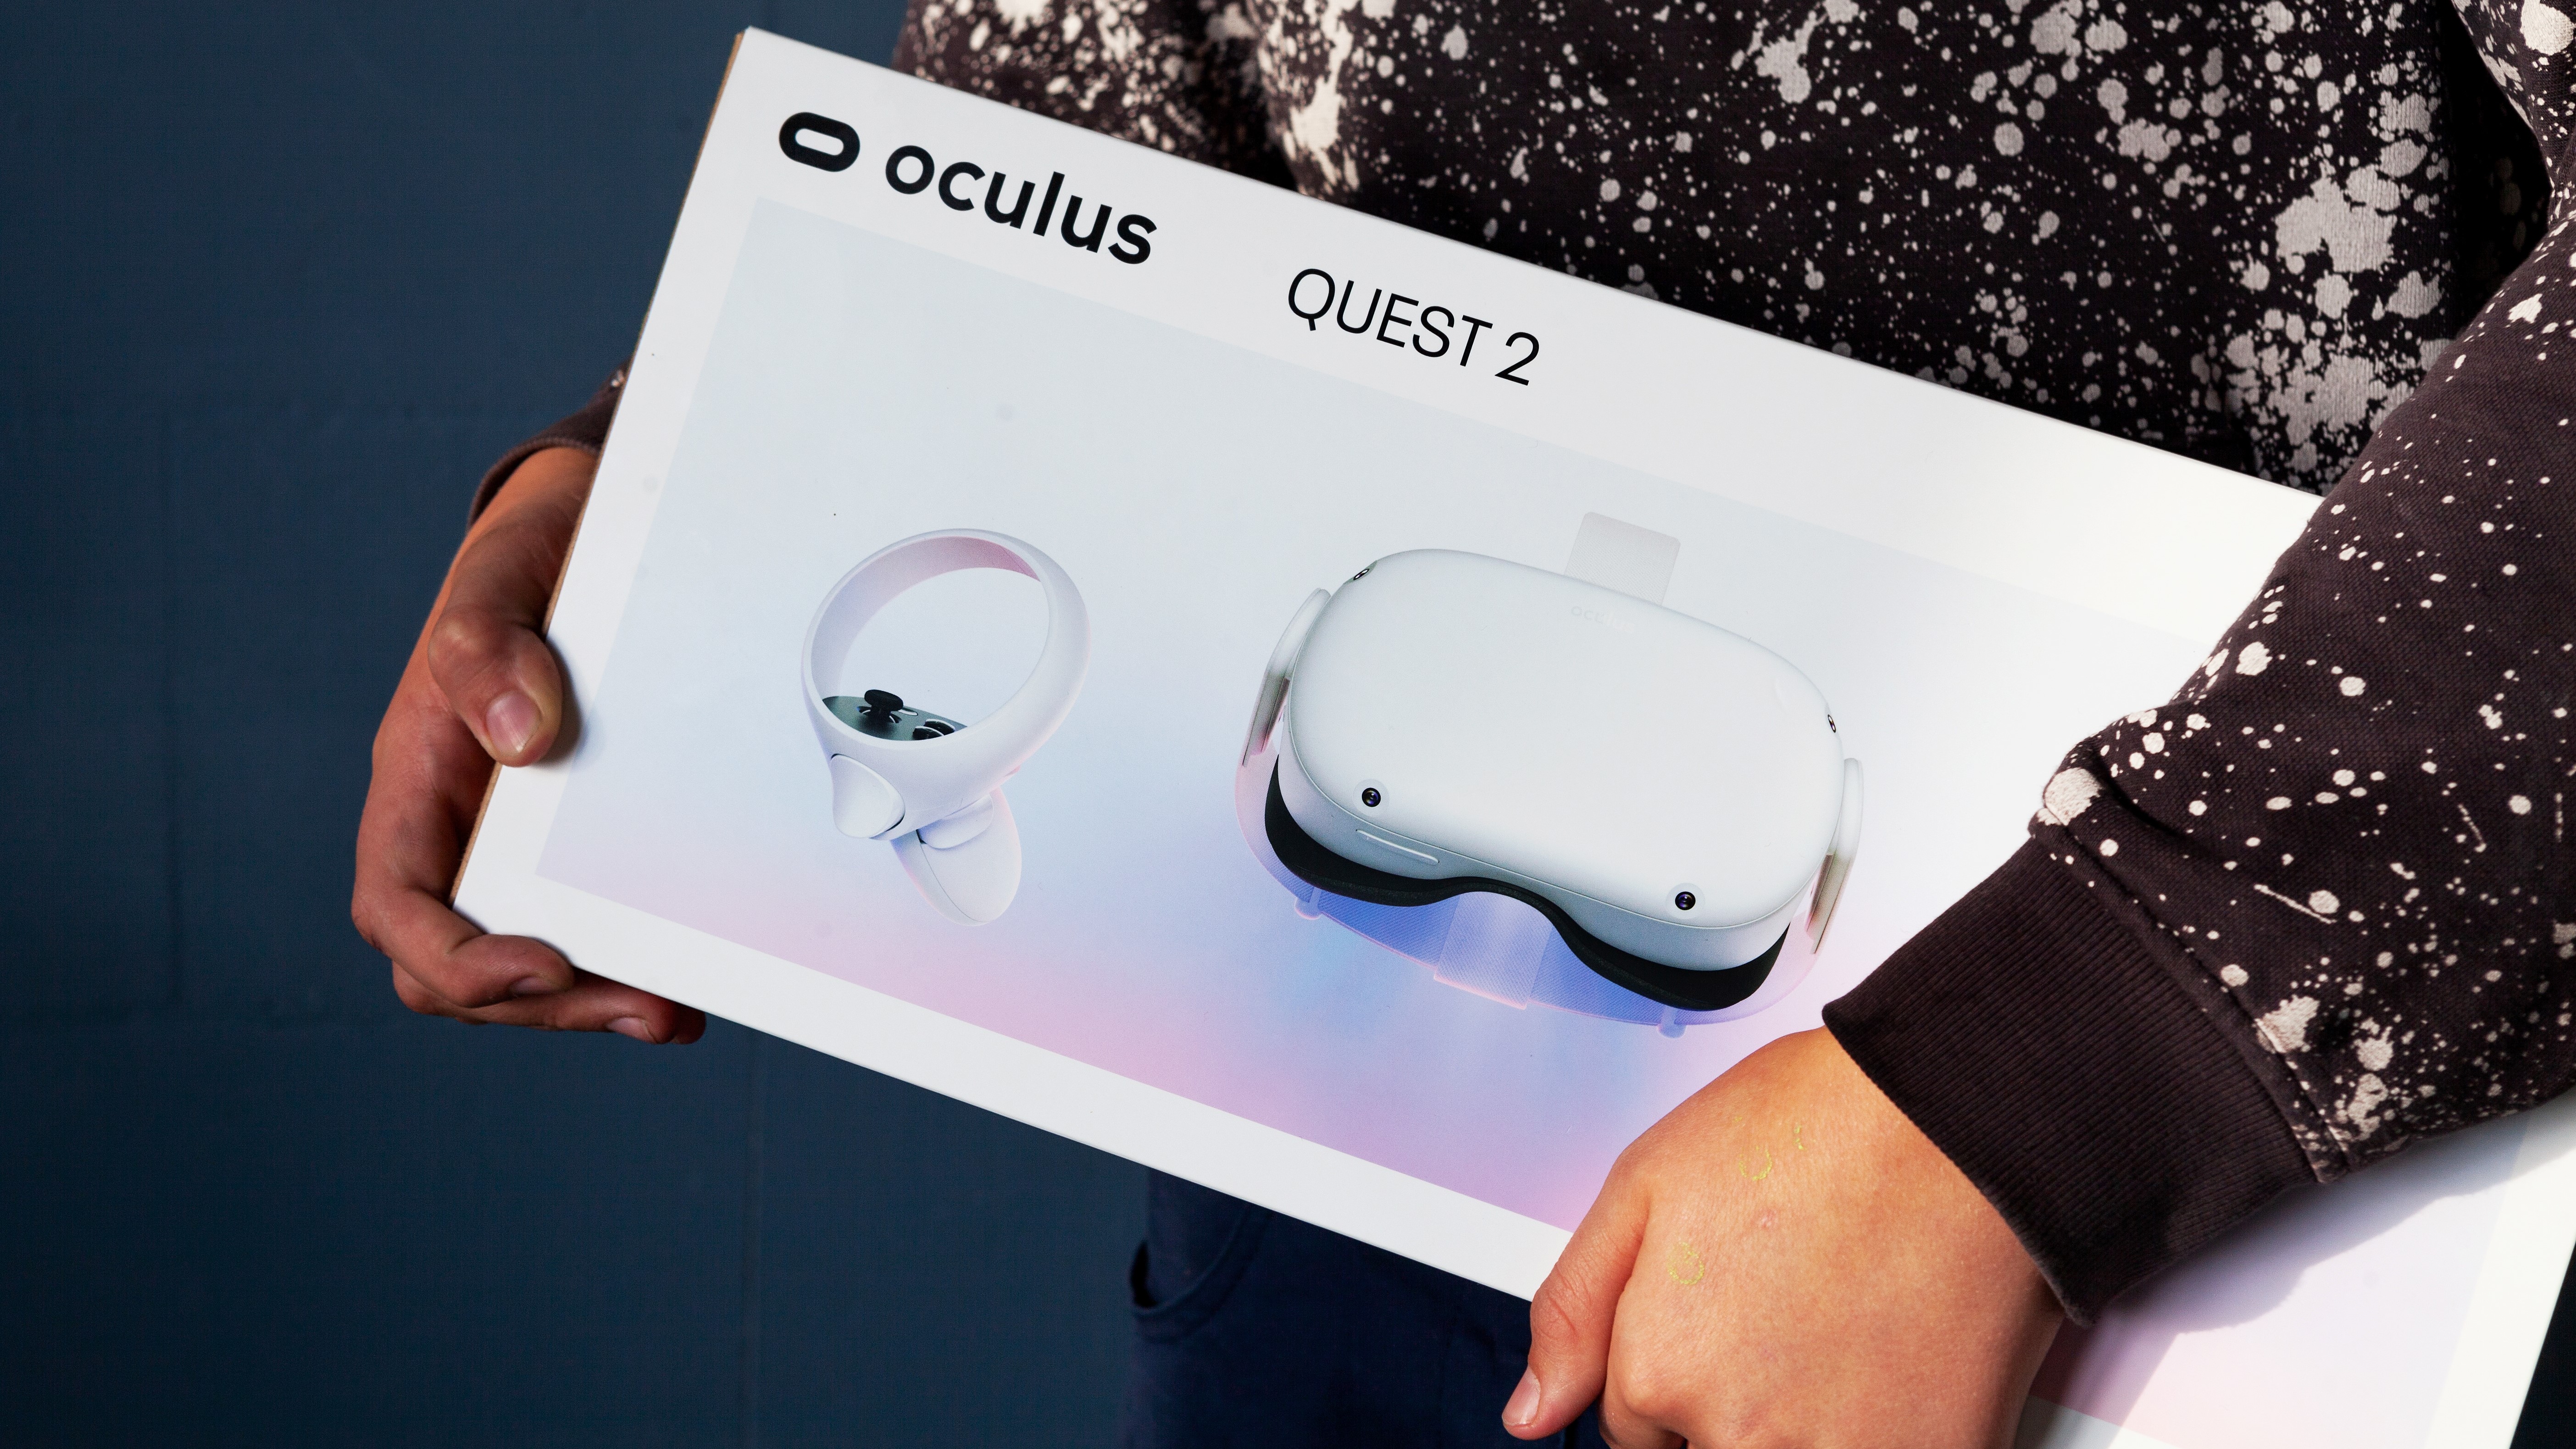 A person carrying a box with an Oculus Quest 2 VR headset in